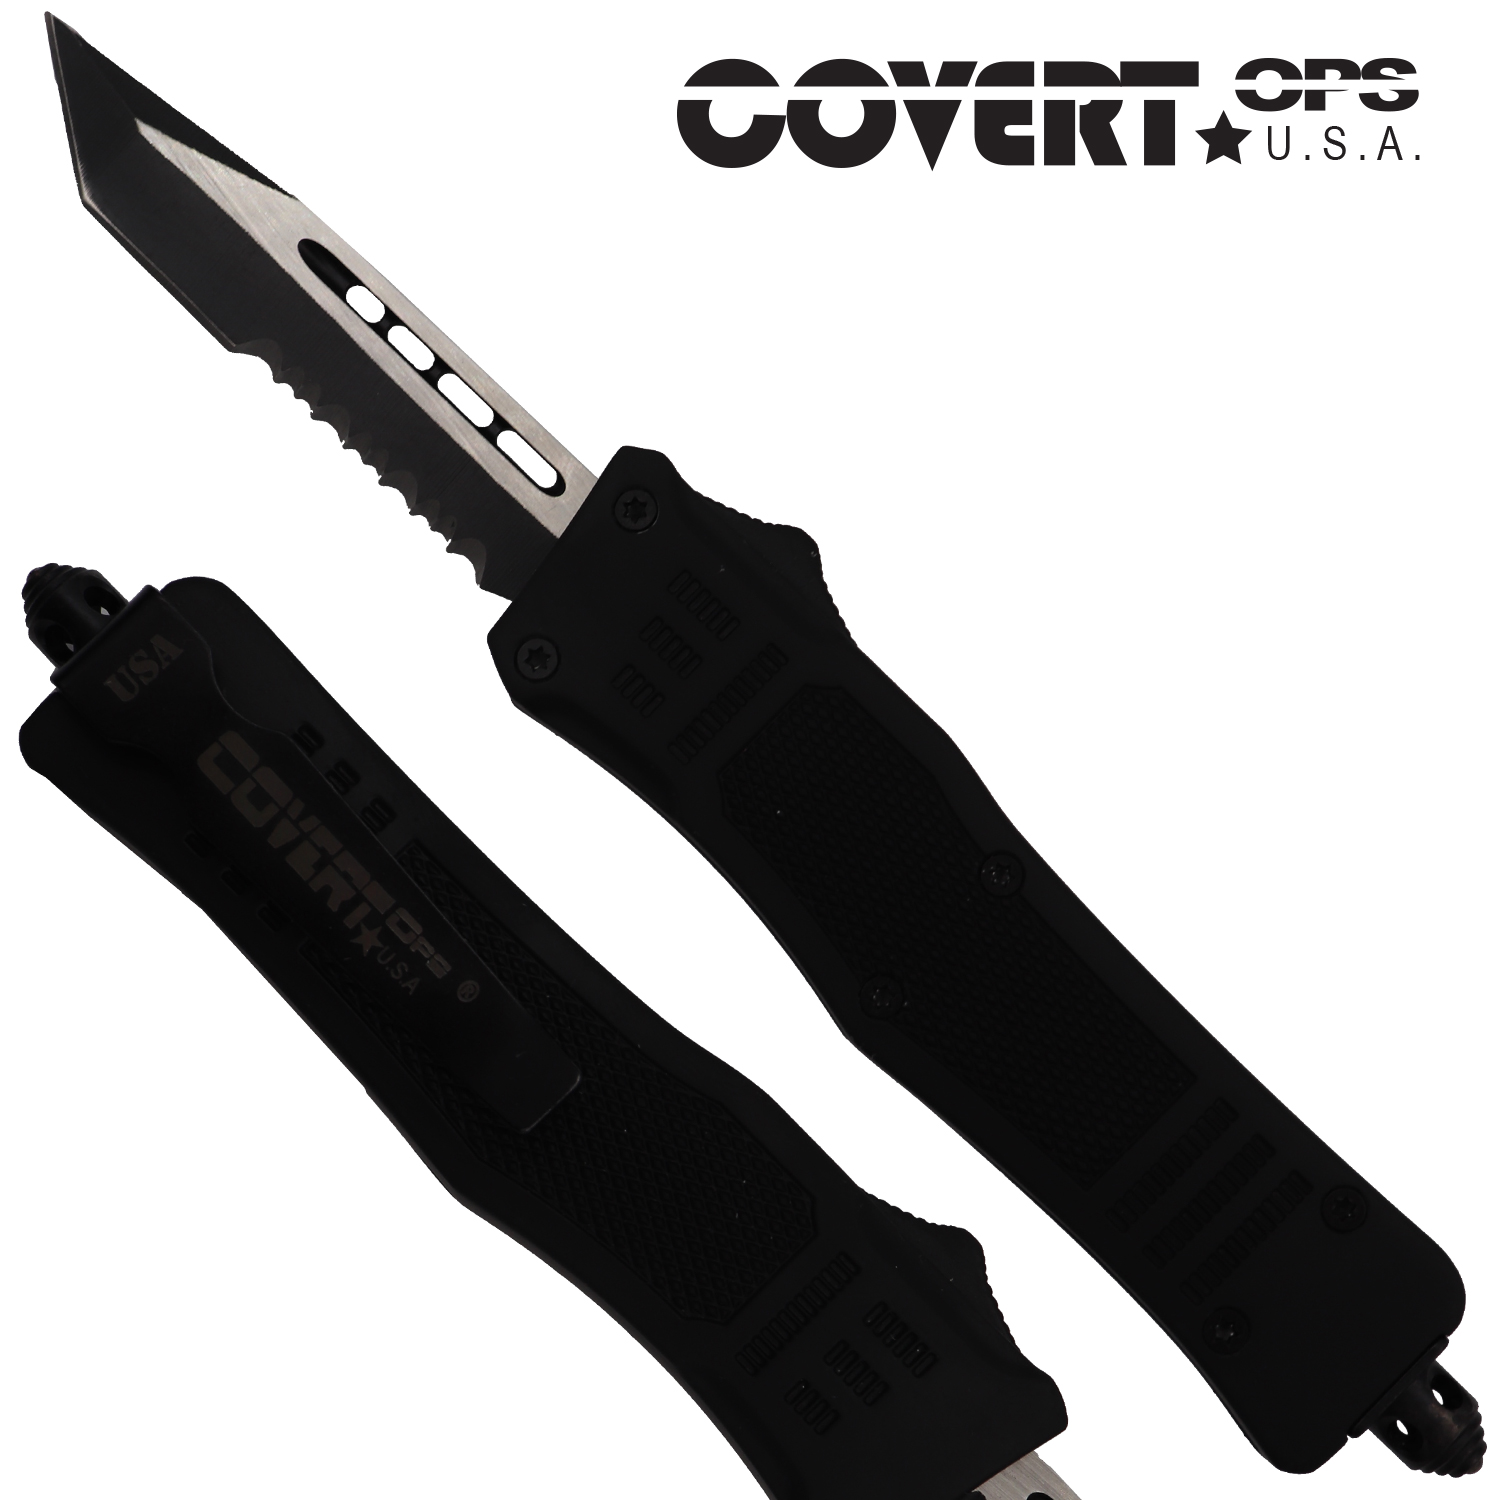 Covert OPS USA OTF Automatic Knife 7 inch overall Black Handle Two Tone Tanto D2 Steel Blade